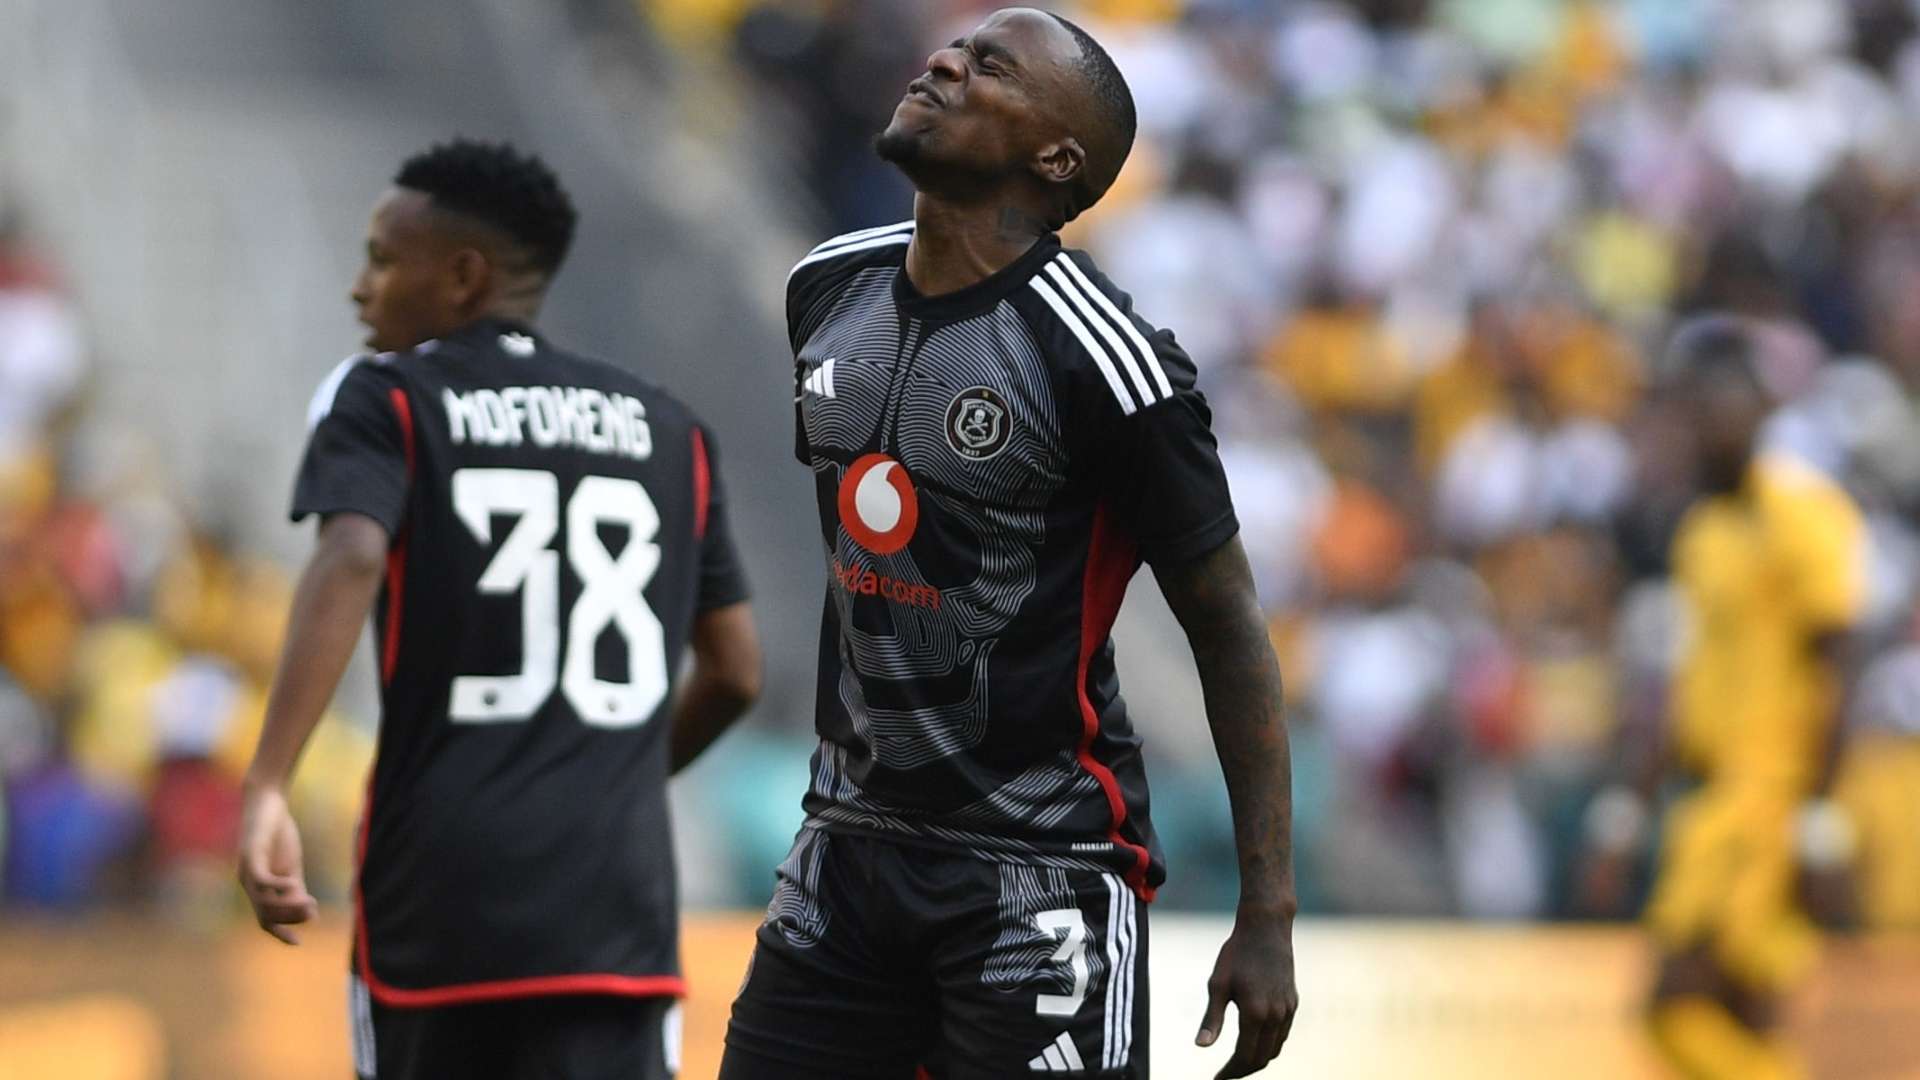 Orlando Pirates players should be fined, poor display by Kaizer Chiefs FC  Jr - Congratulations to Mamelodi Sundowns for winning the league once  again' - Fans | Goal.com South Africa